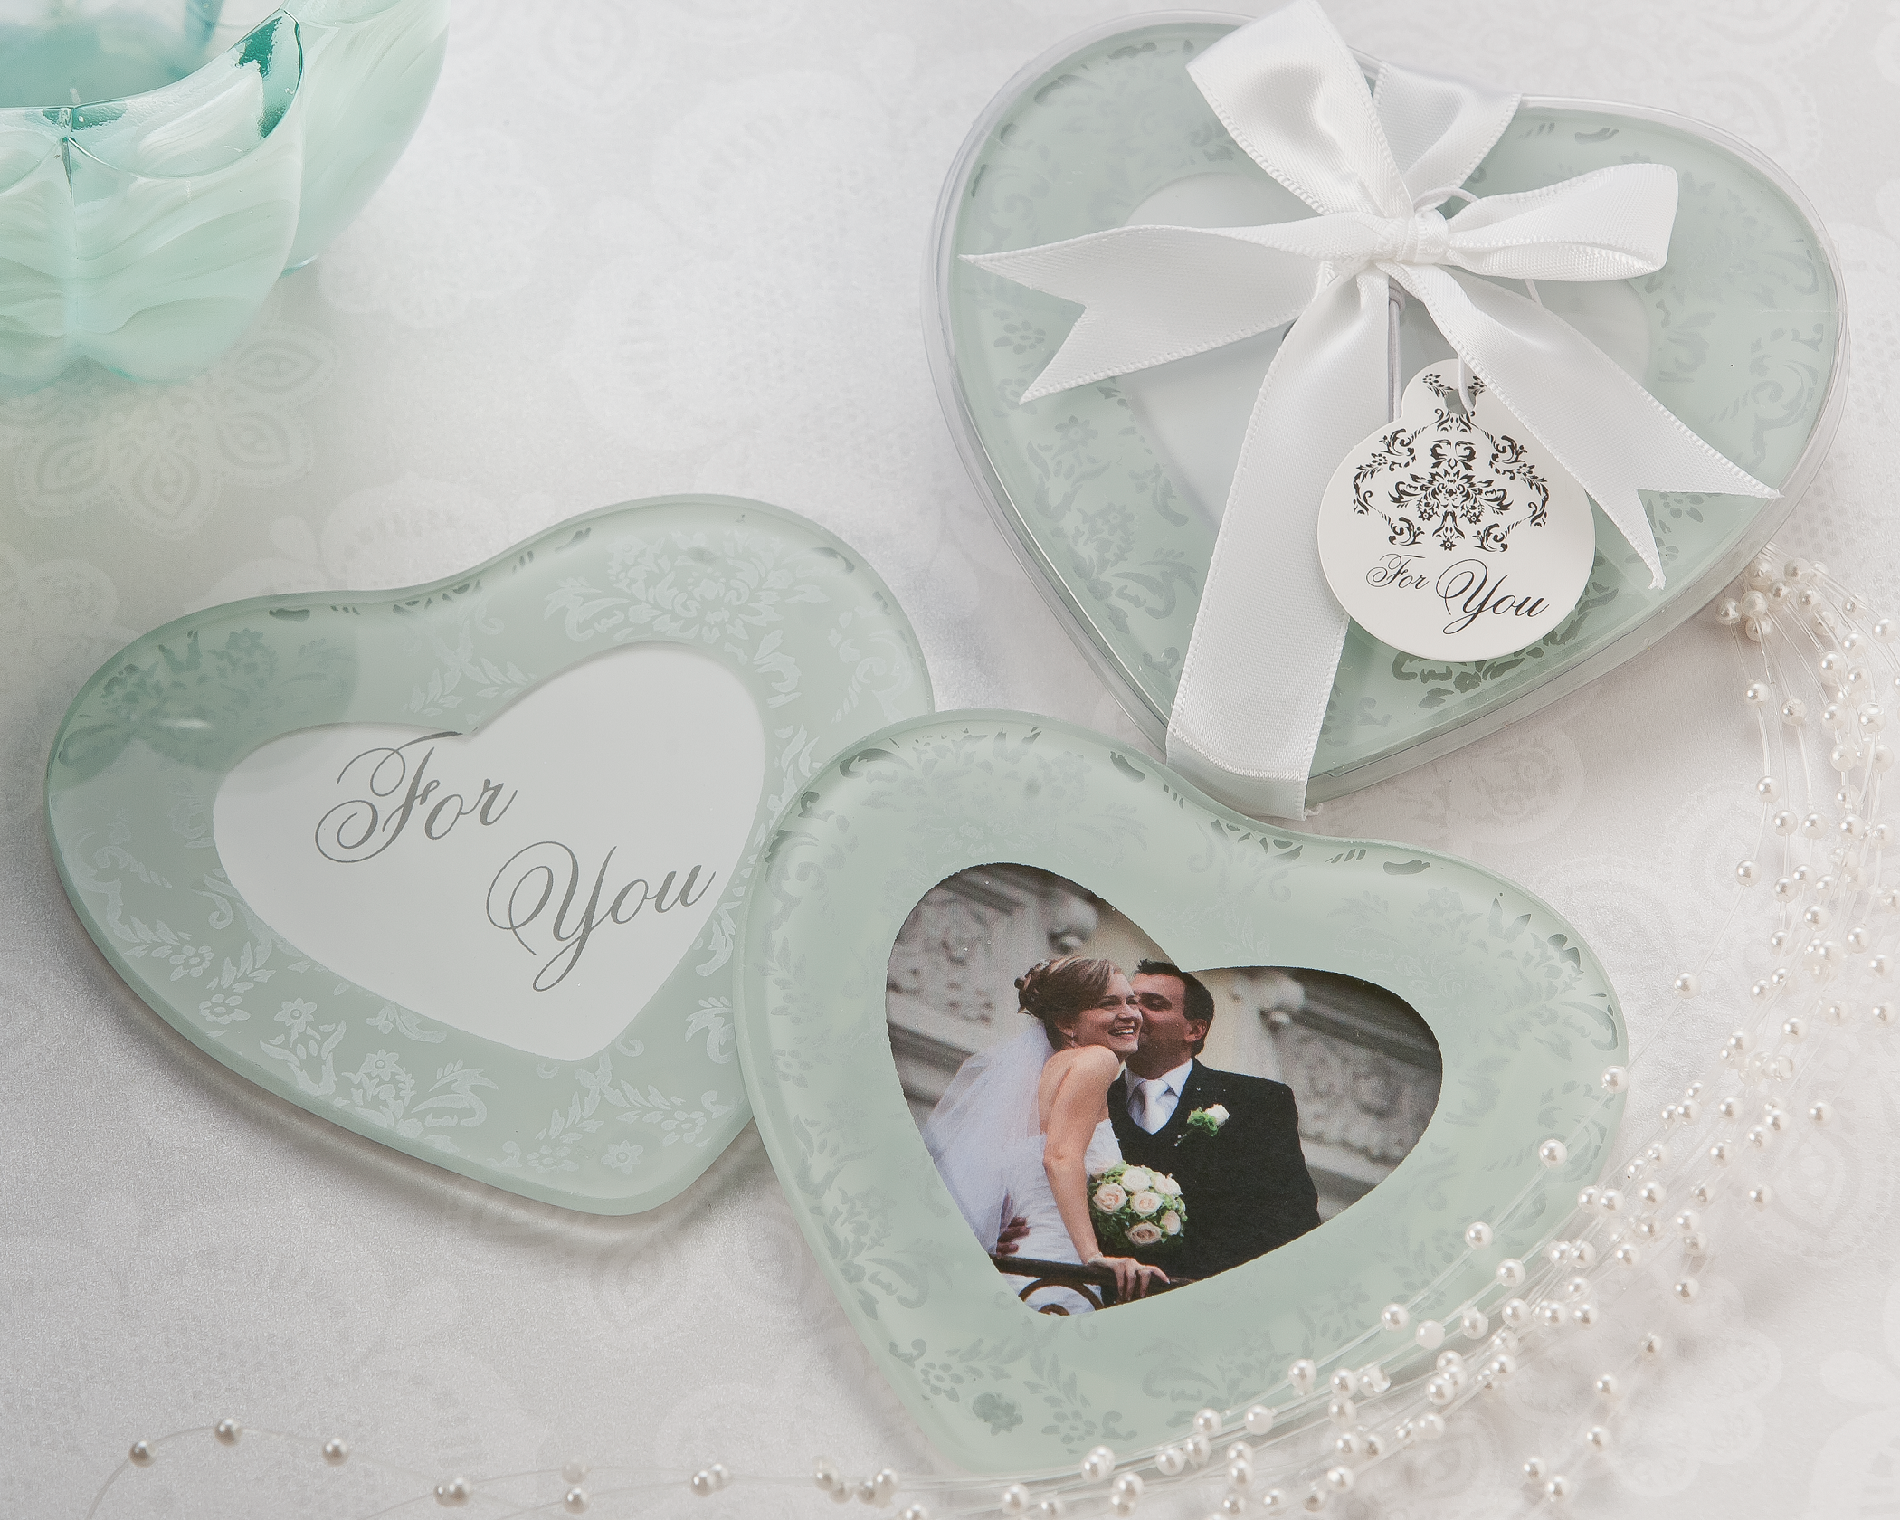 "Heartfelt Memories" Frosted Heart Photo Coasters (Set of 2) [Pack of 25]